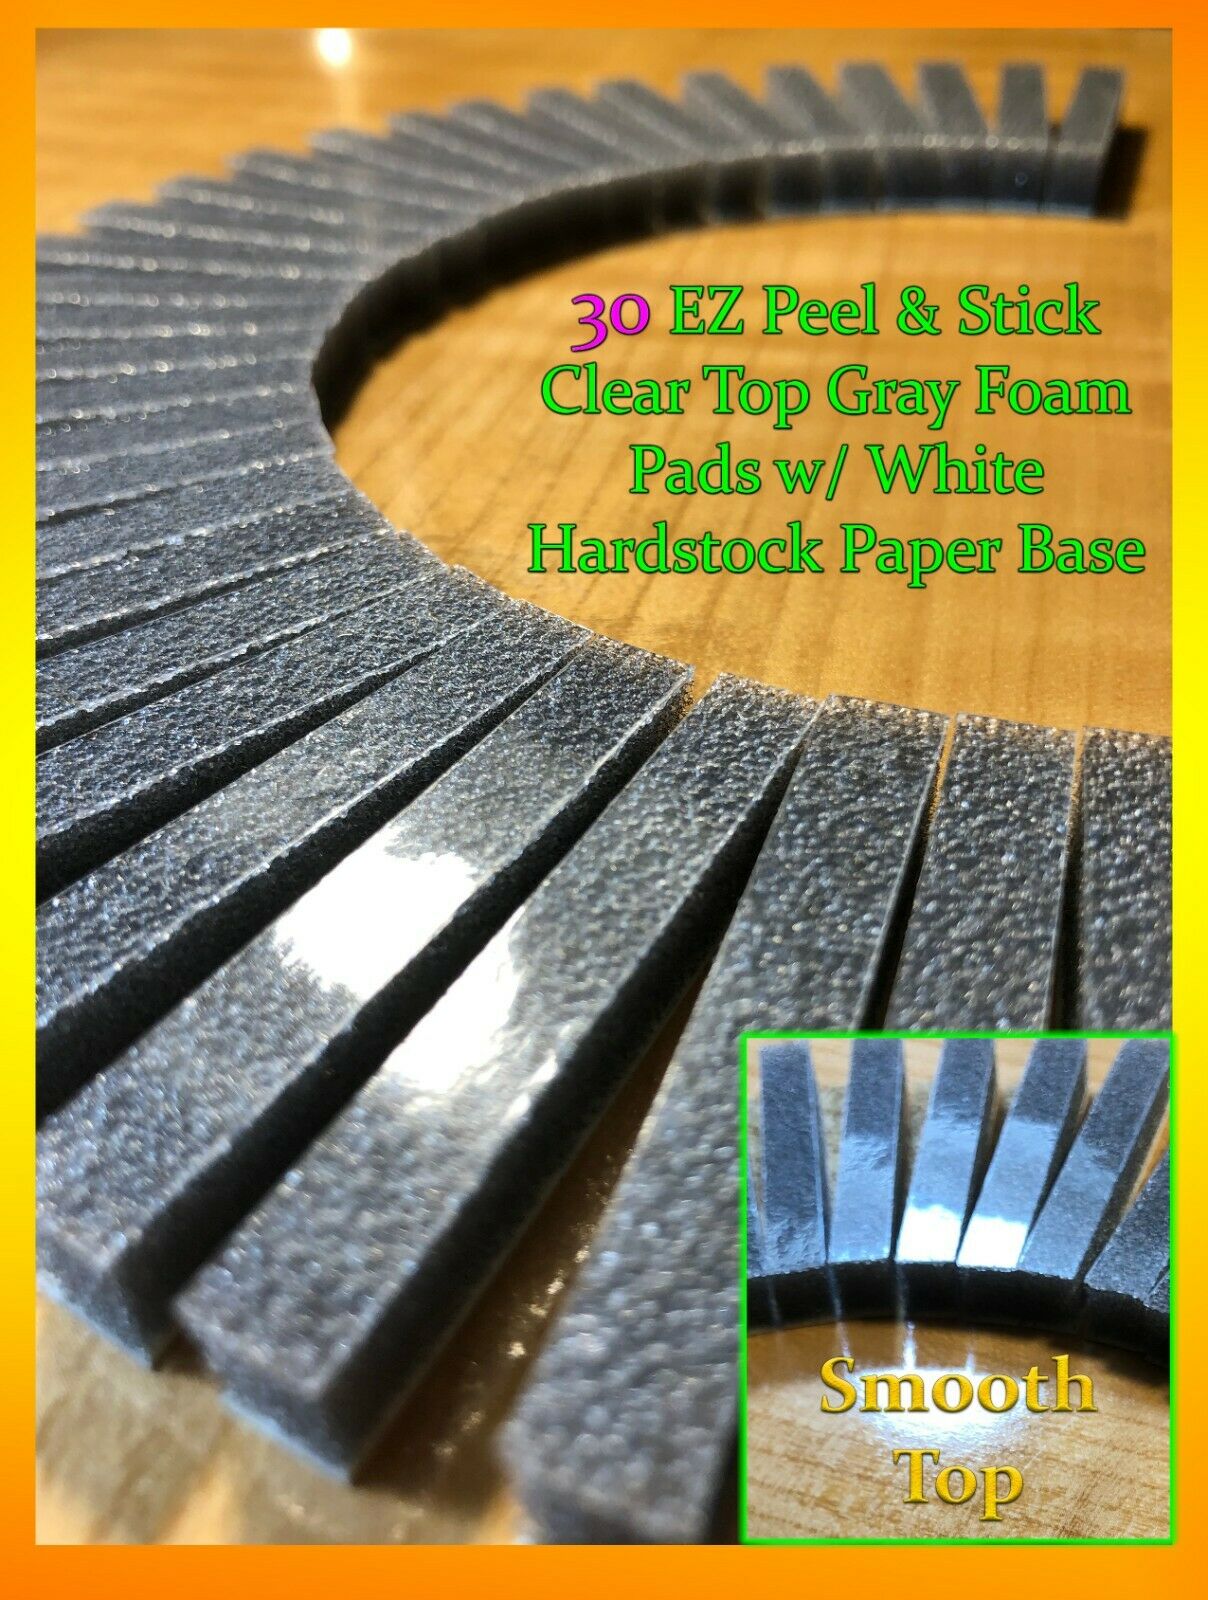 30 EZ Peel & Stick Clear Top Soft CHARCOAL GRAY Foam Pads For 8-track tape